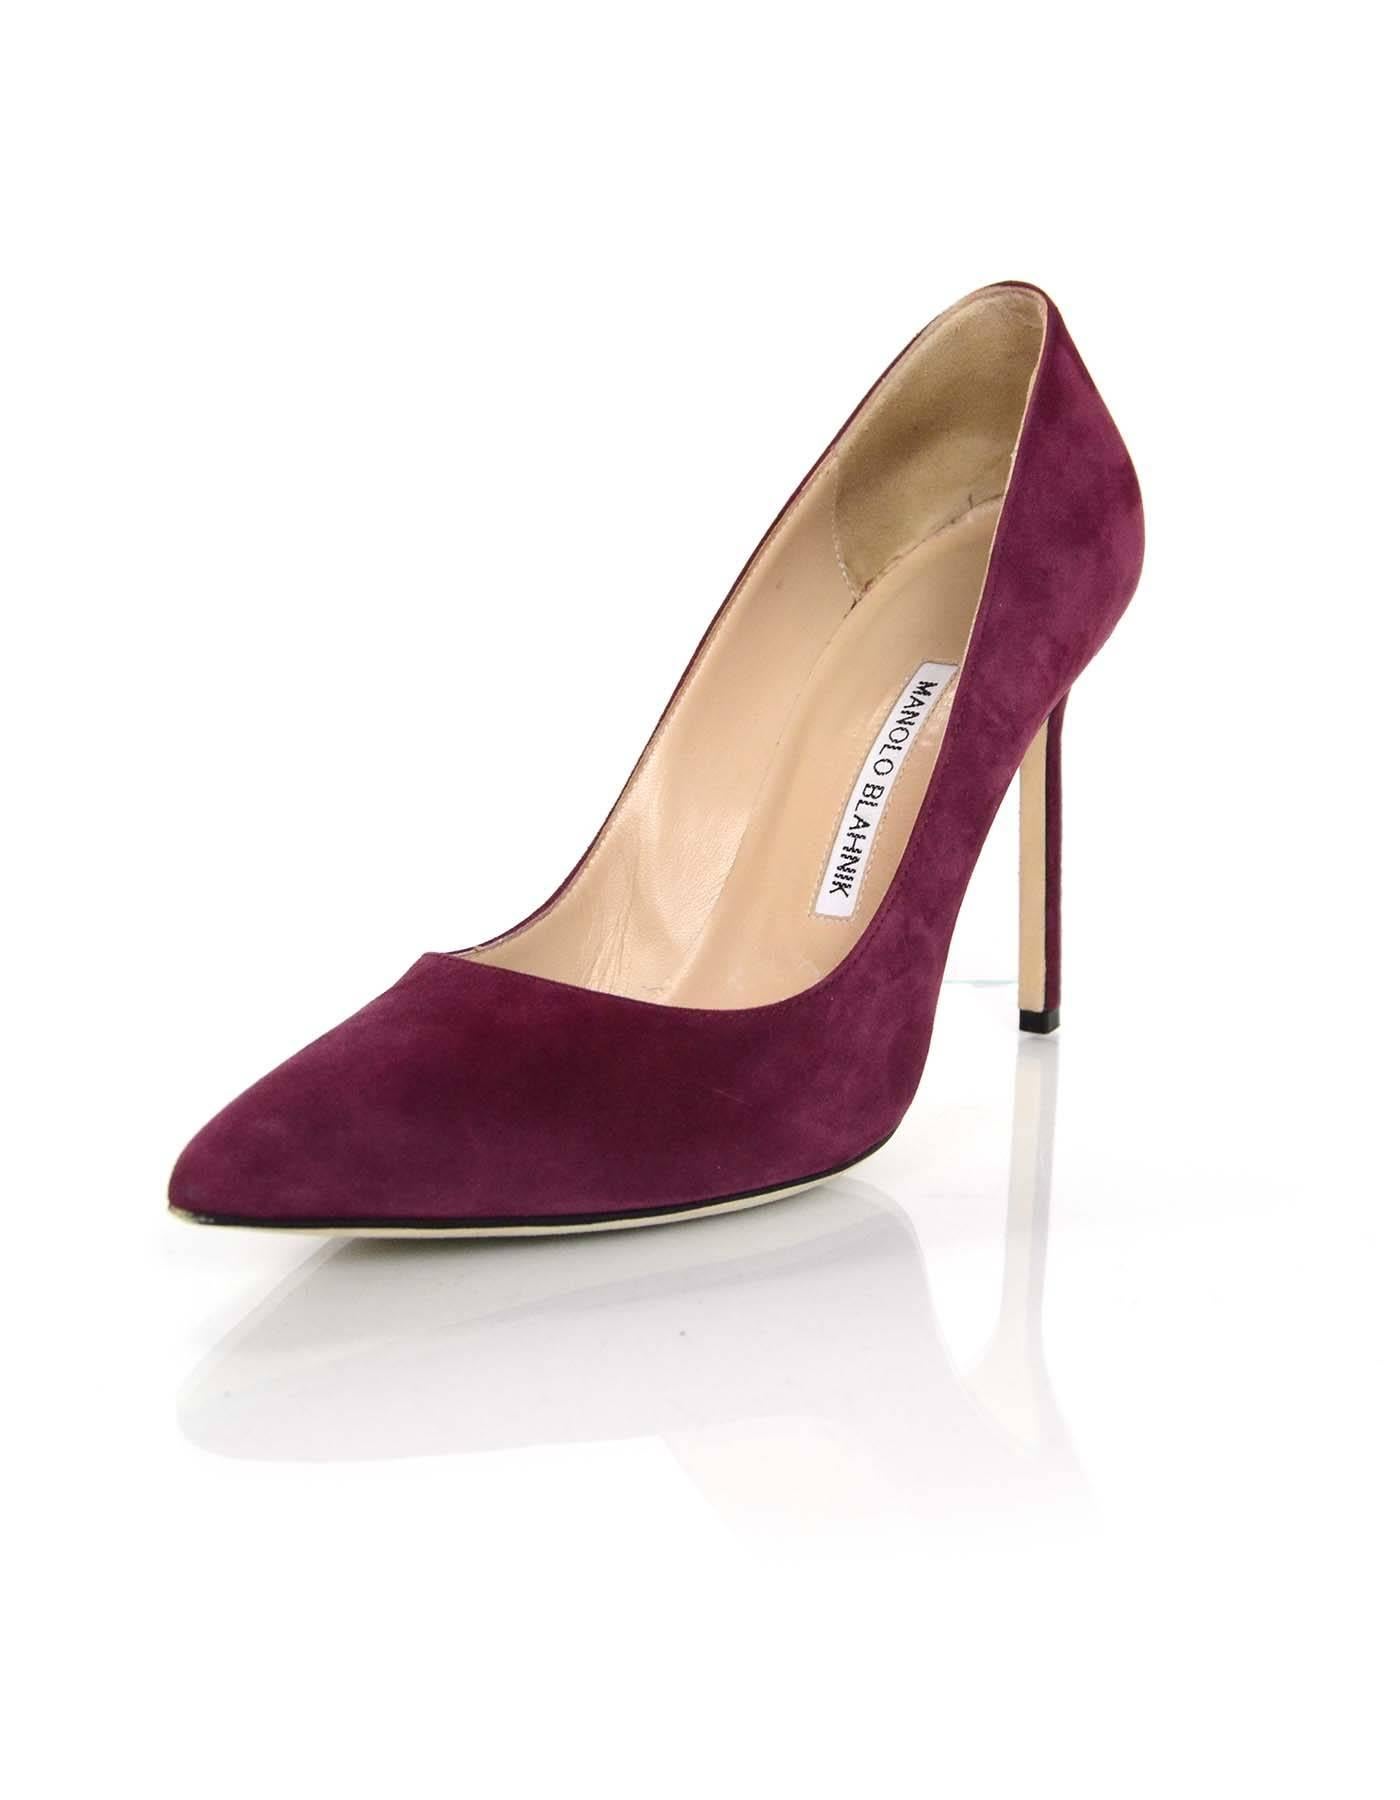 Manolo Blahnik Burgundy Suede BB Pumps Sz 38

Made In: Italy
Color: Burgundy
Materials: Suede
Closure/Opening: Slide on
Sole Stamp: Manolo Blahnik Made in Italy 38
Retail Price: $595 + tax
Overall Condition: Excellent pre-owned condition with the